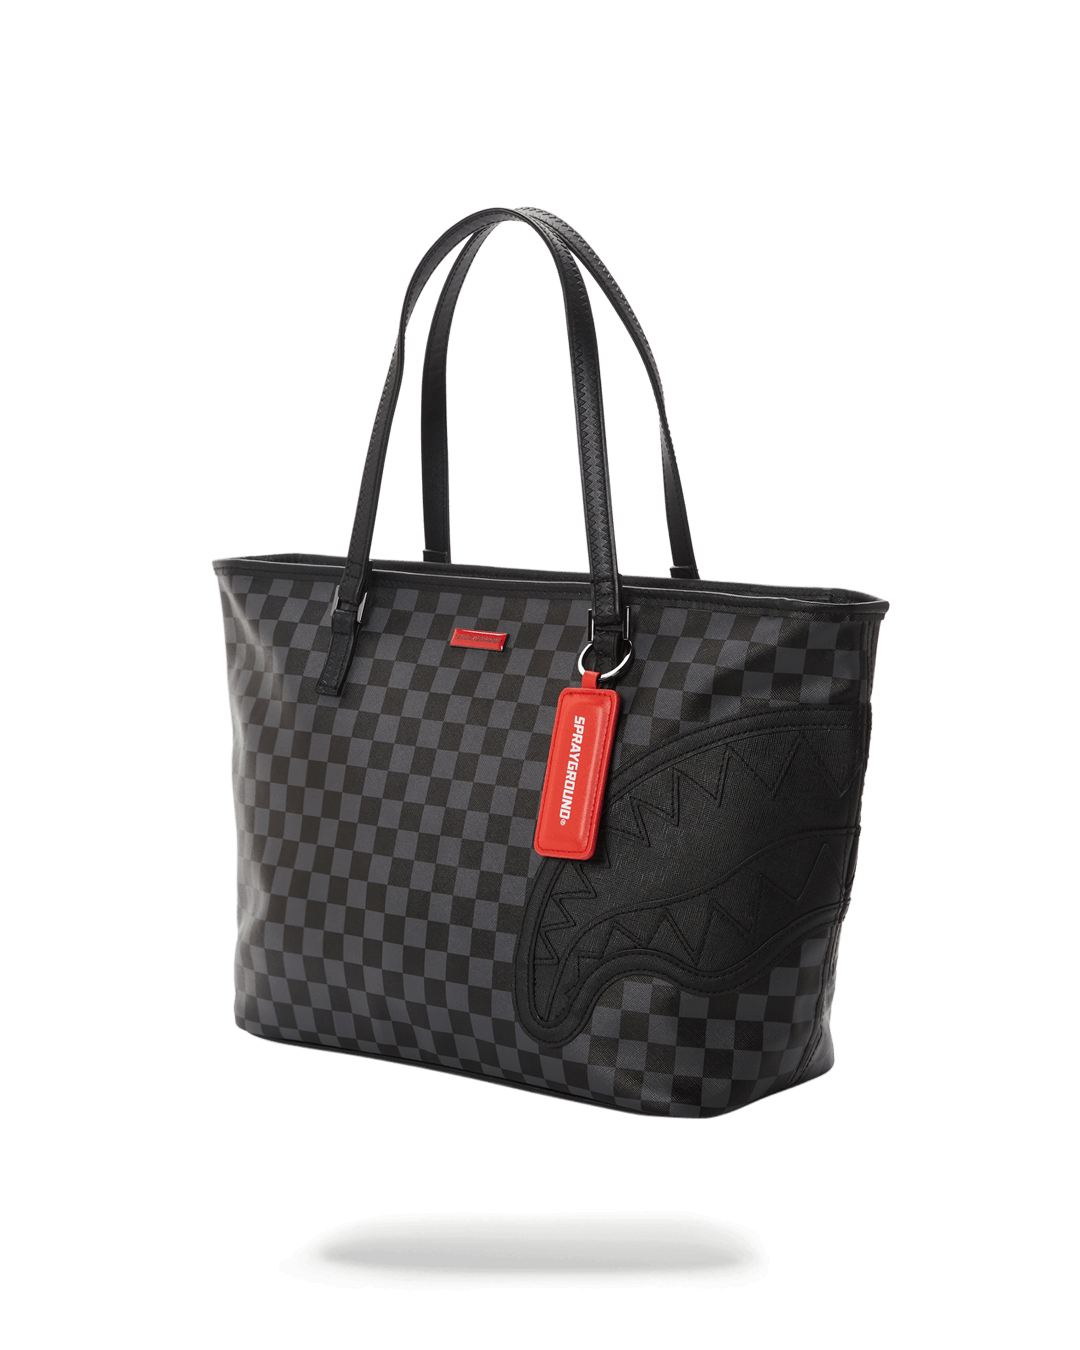 HENNY BLACK TOTE - HIGH QUALITY AND INEXPENSIVE - HENNY BLACK TOTE HIGH QUALITY AND INEXPENSIVE-01-6